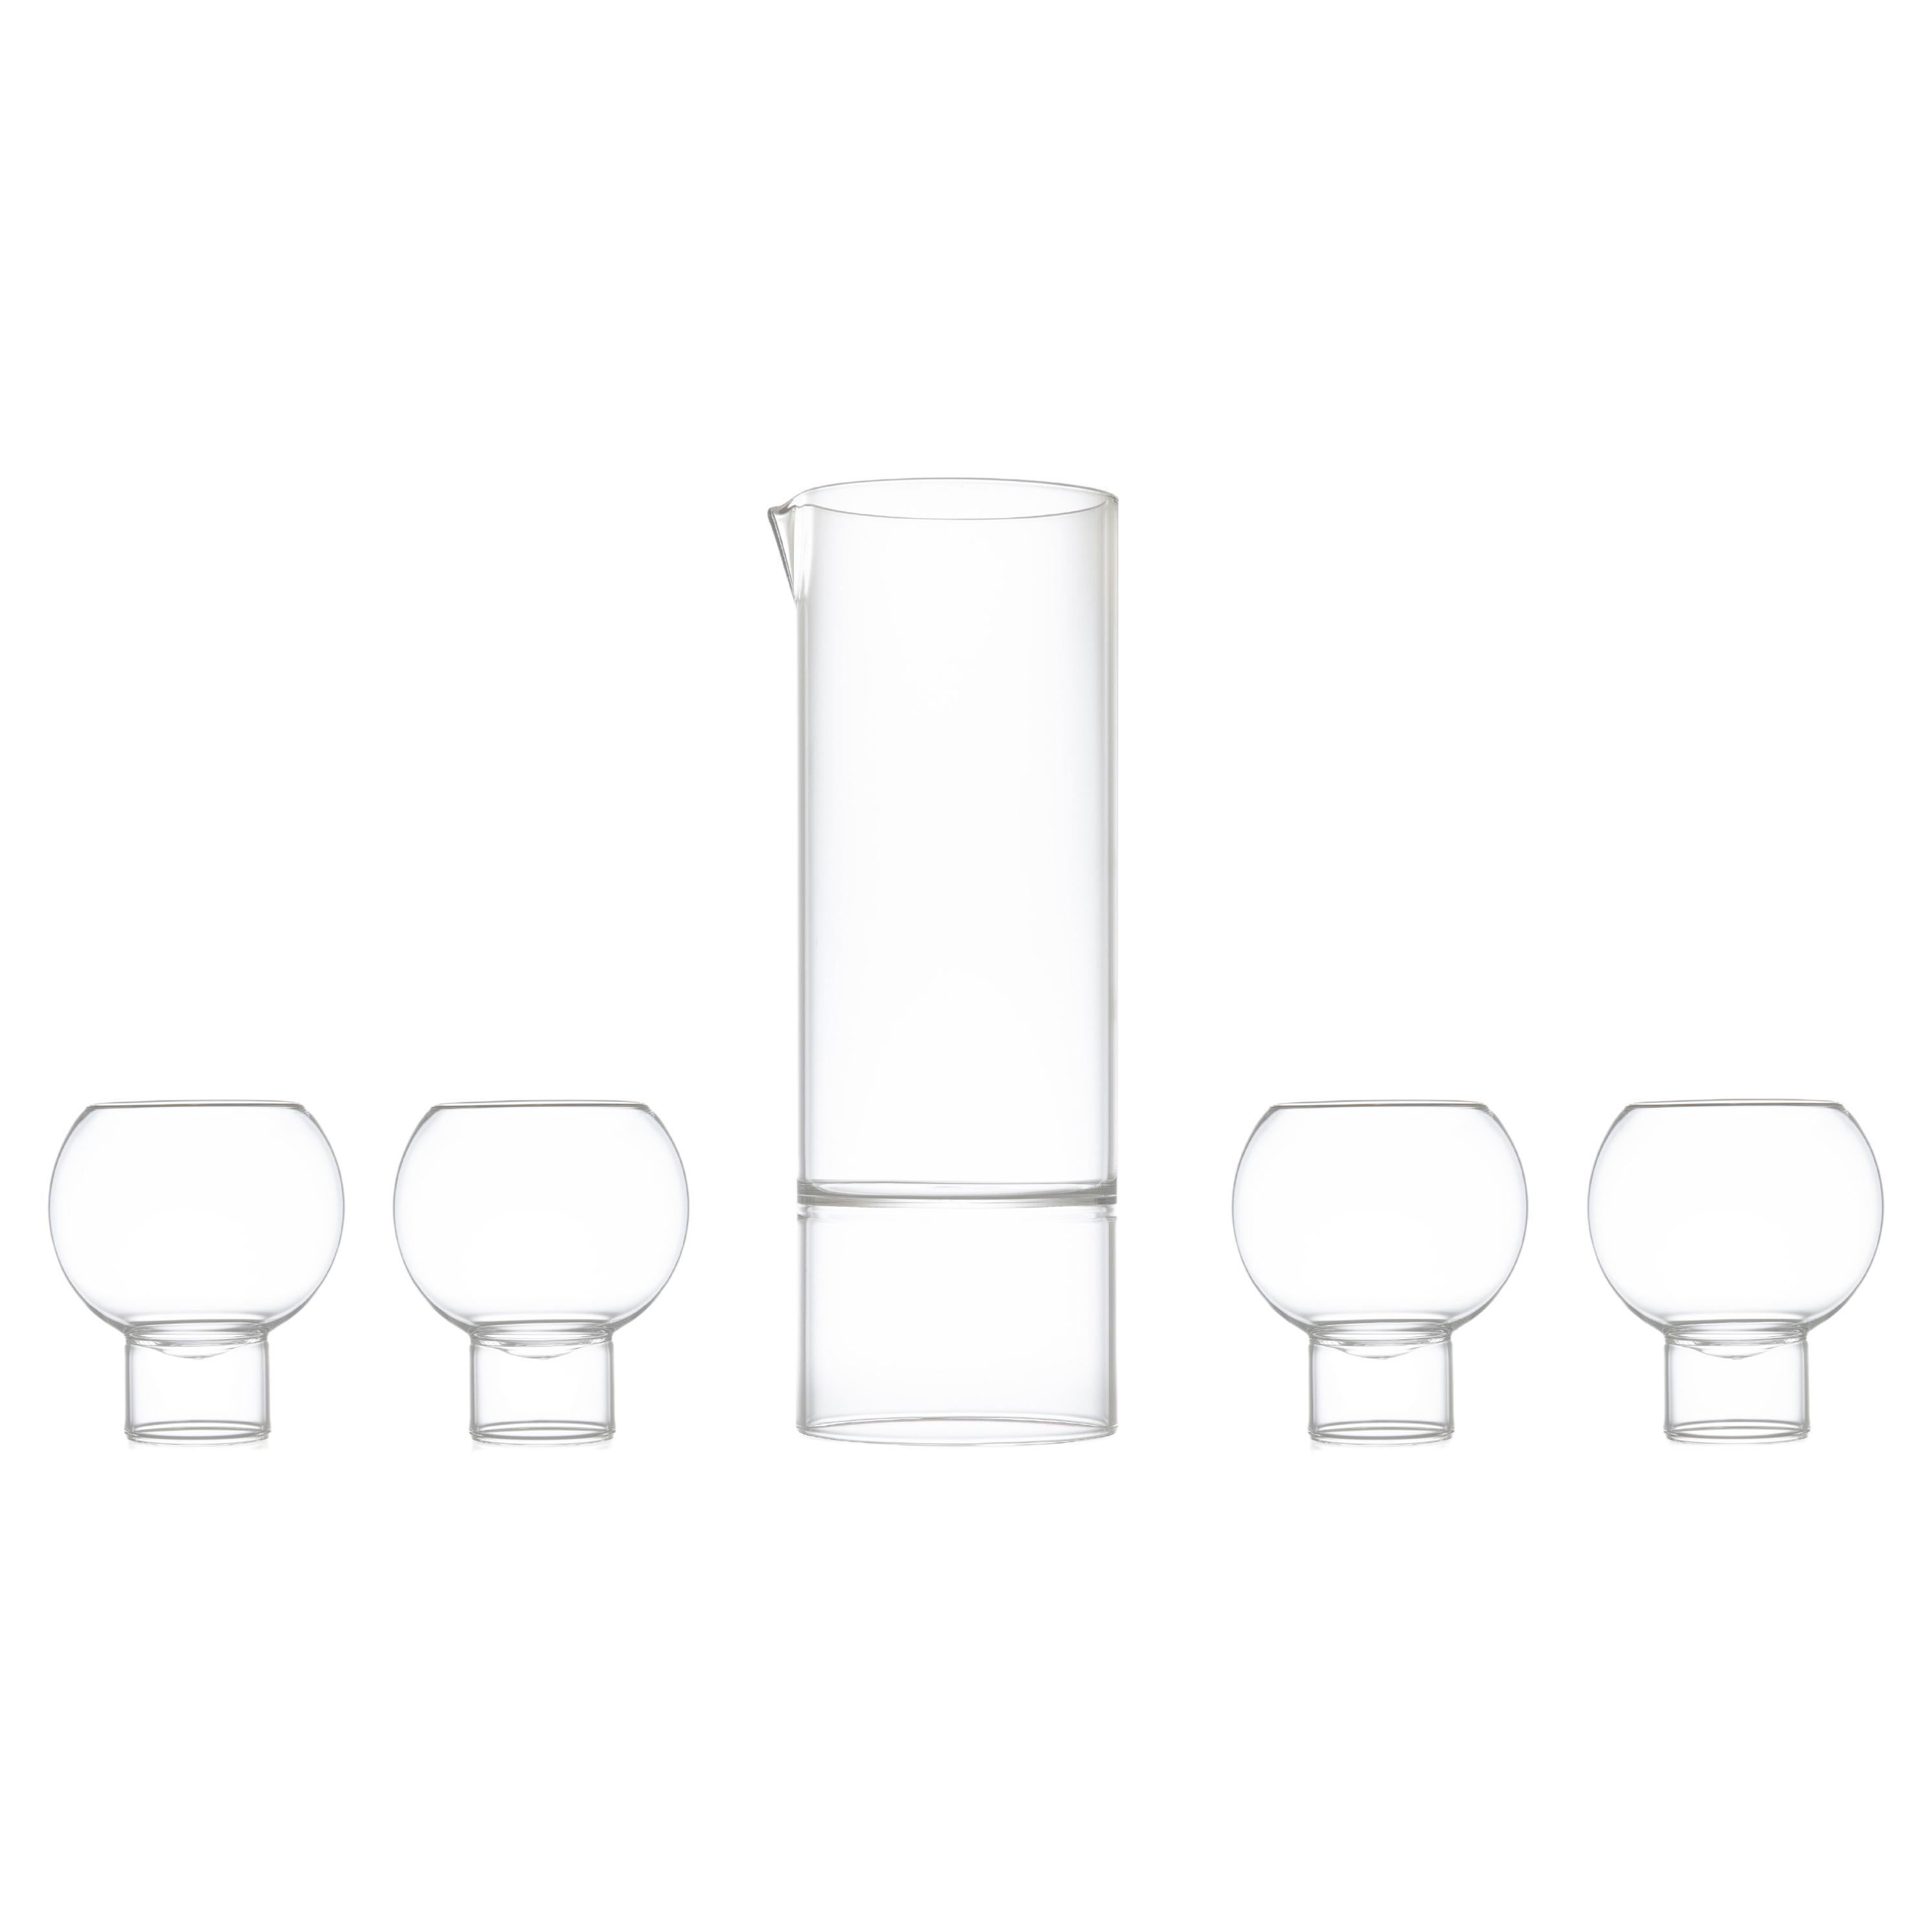 https://a.1stdibscdn.com/contemporary-czech-glass-revolution-carafe-with-four-tulip-glasses-in-stock-for-sale/f_26333/f_307541121665169733246/f_30754112_1665169733994_bg_processed.jpg